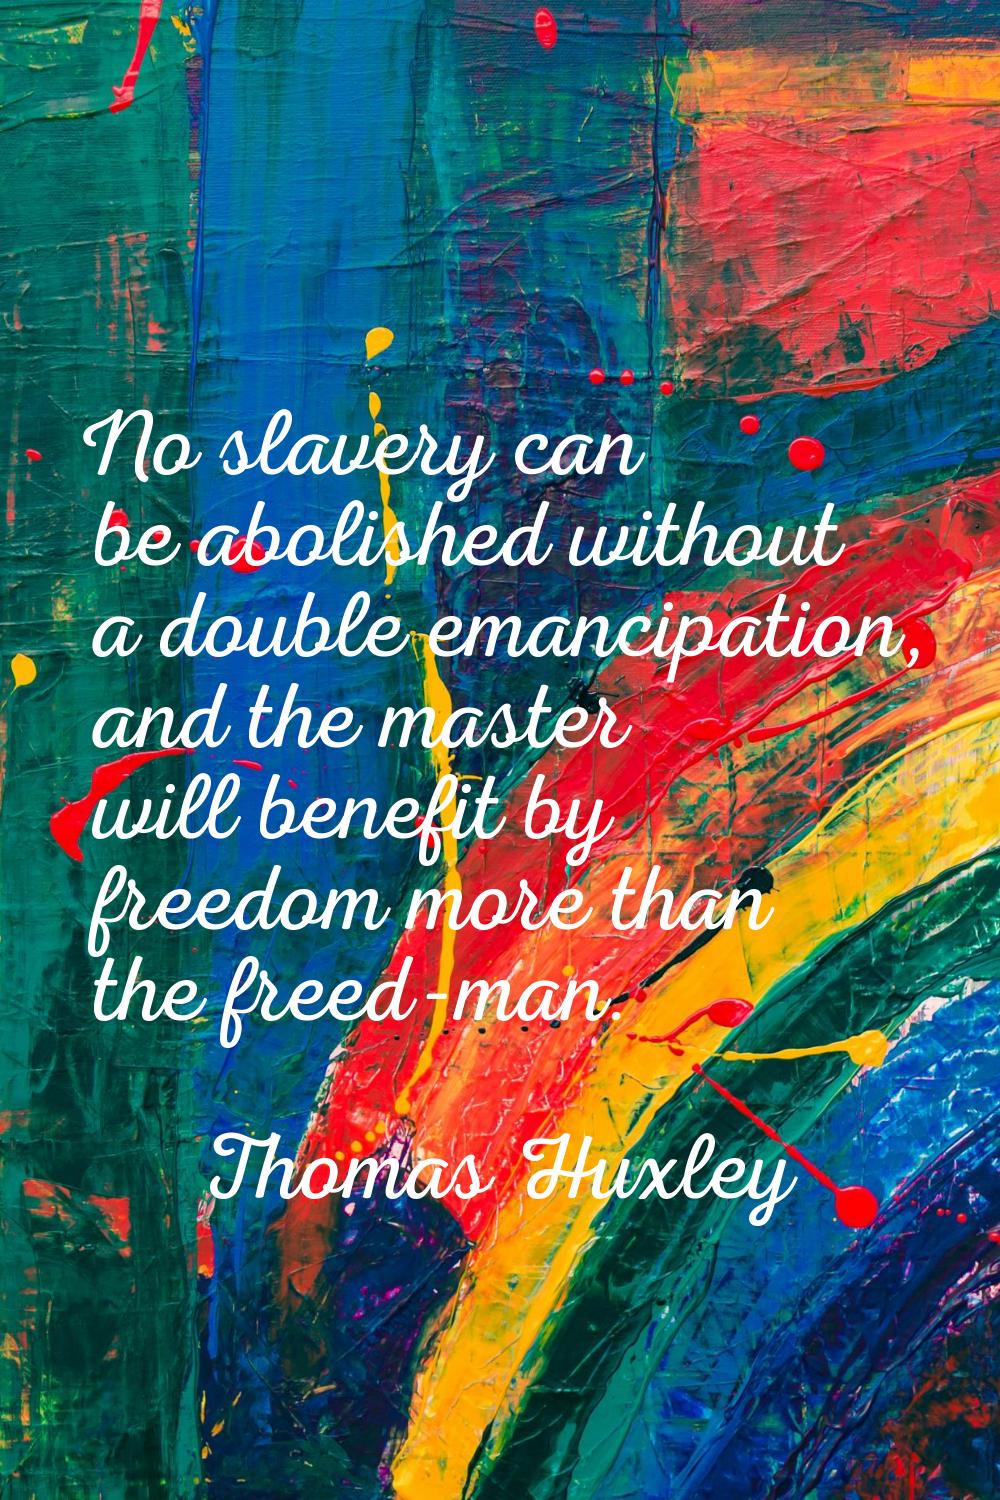 No slavery can be abolished without a double emancipation, and the master will benefit by freedom m